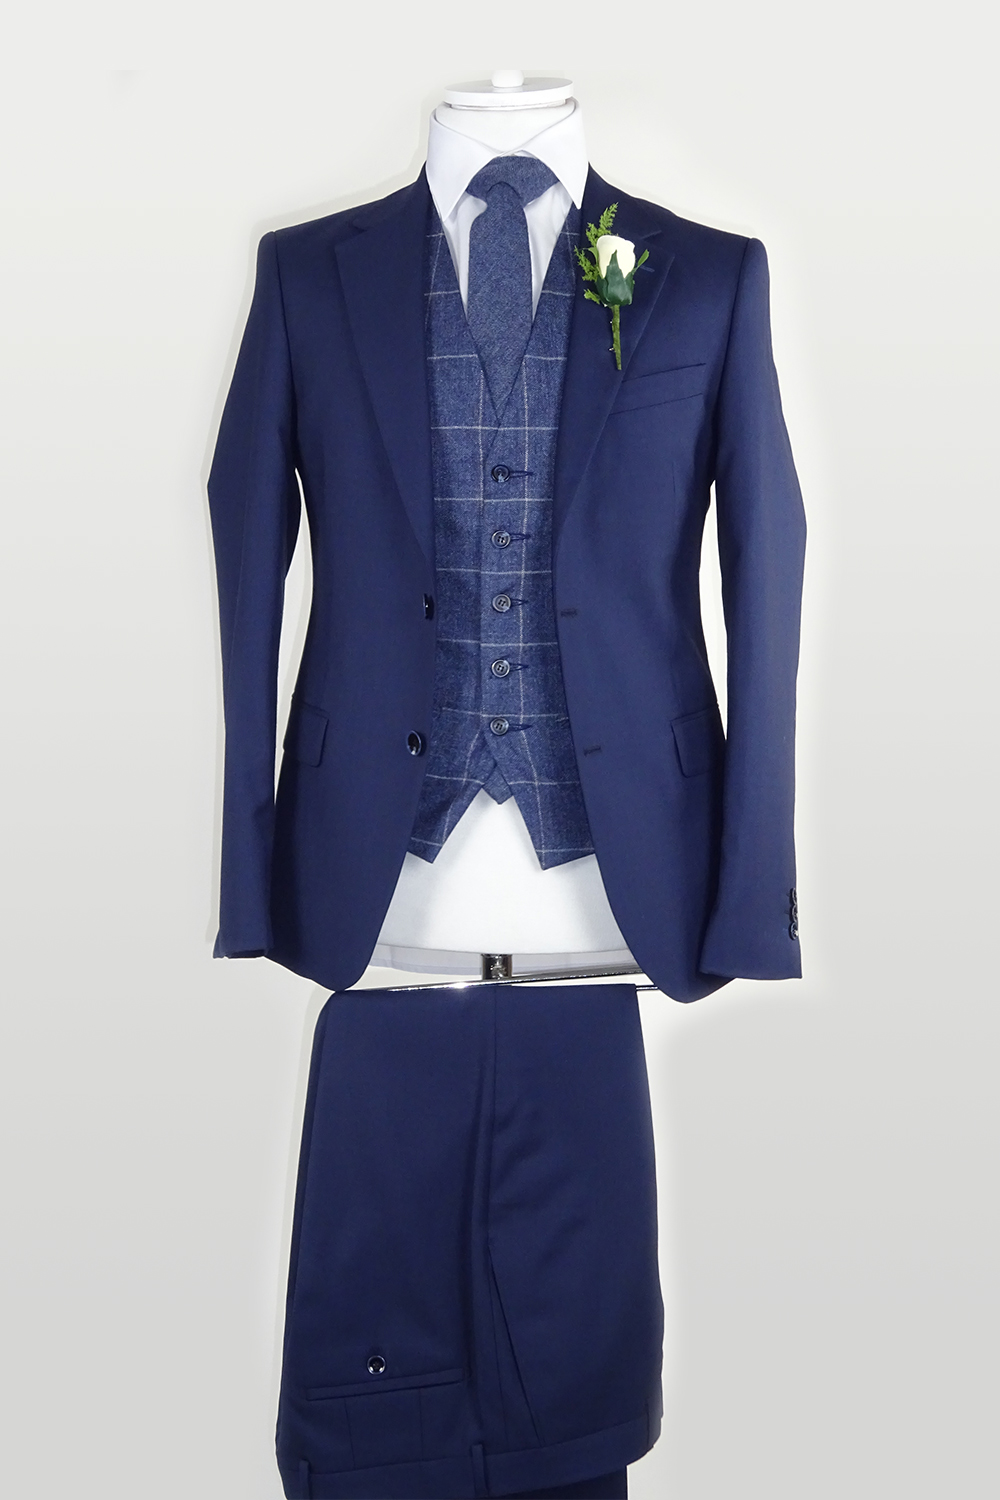 BROMLEY  Stone Check Suit with Kelvin Navy Waistcoat  Marc Darcy